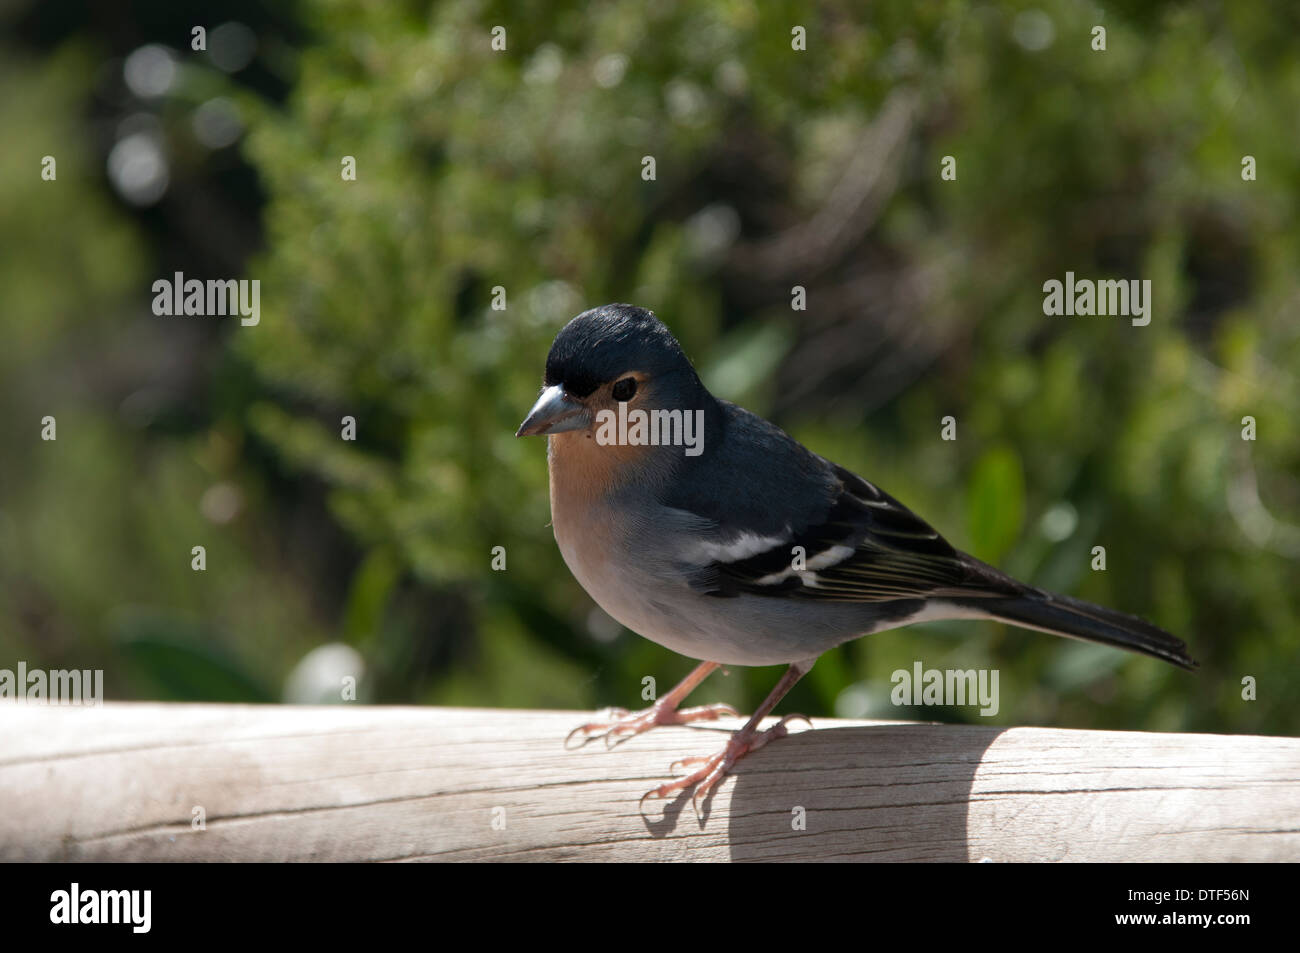 The La Palma Chaffinch is a subspecies of the Common Chaffinch endemic to La Palma in the Canary islands.  La Palma-Buchfink Stock Photo